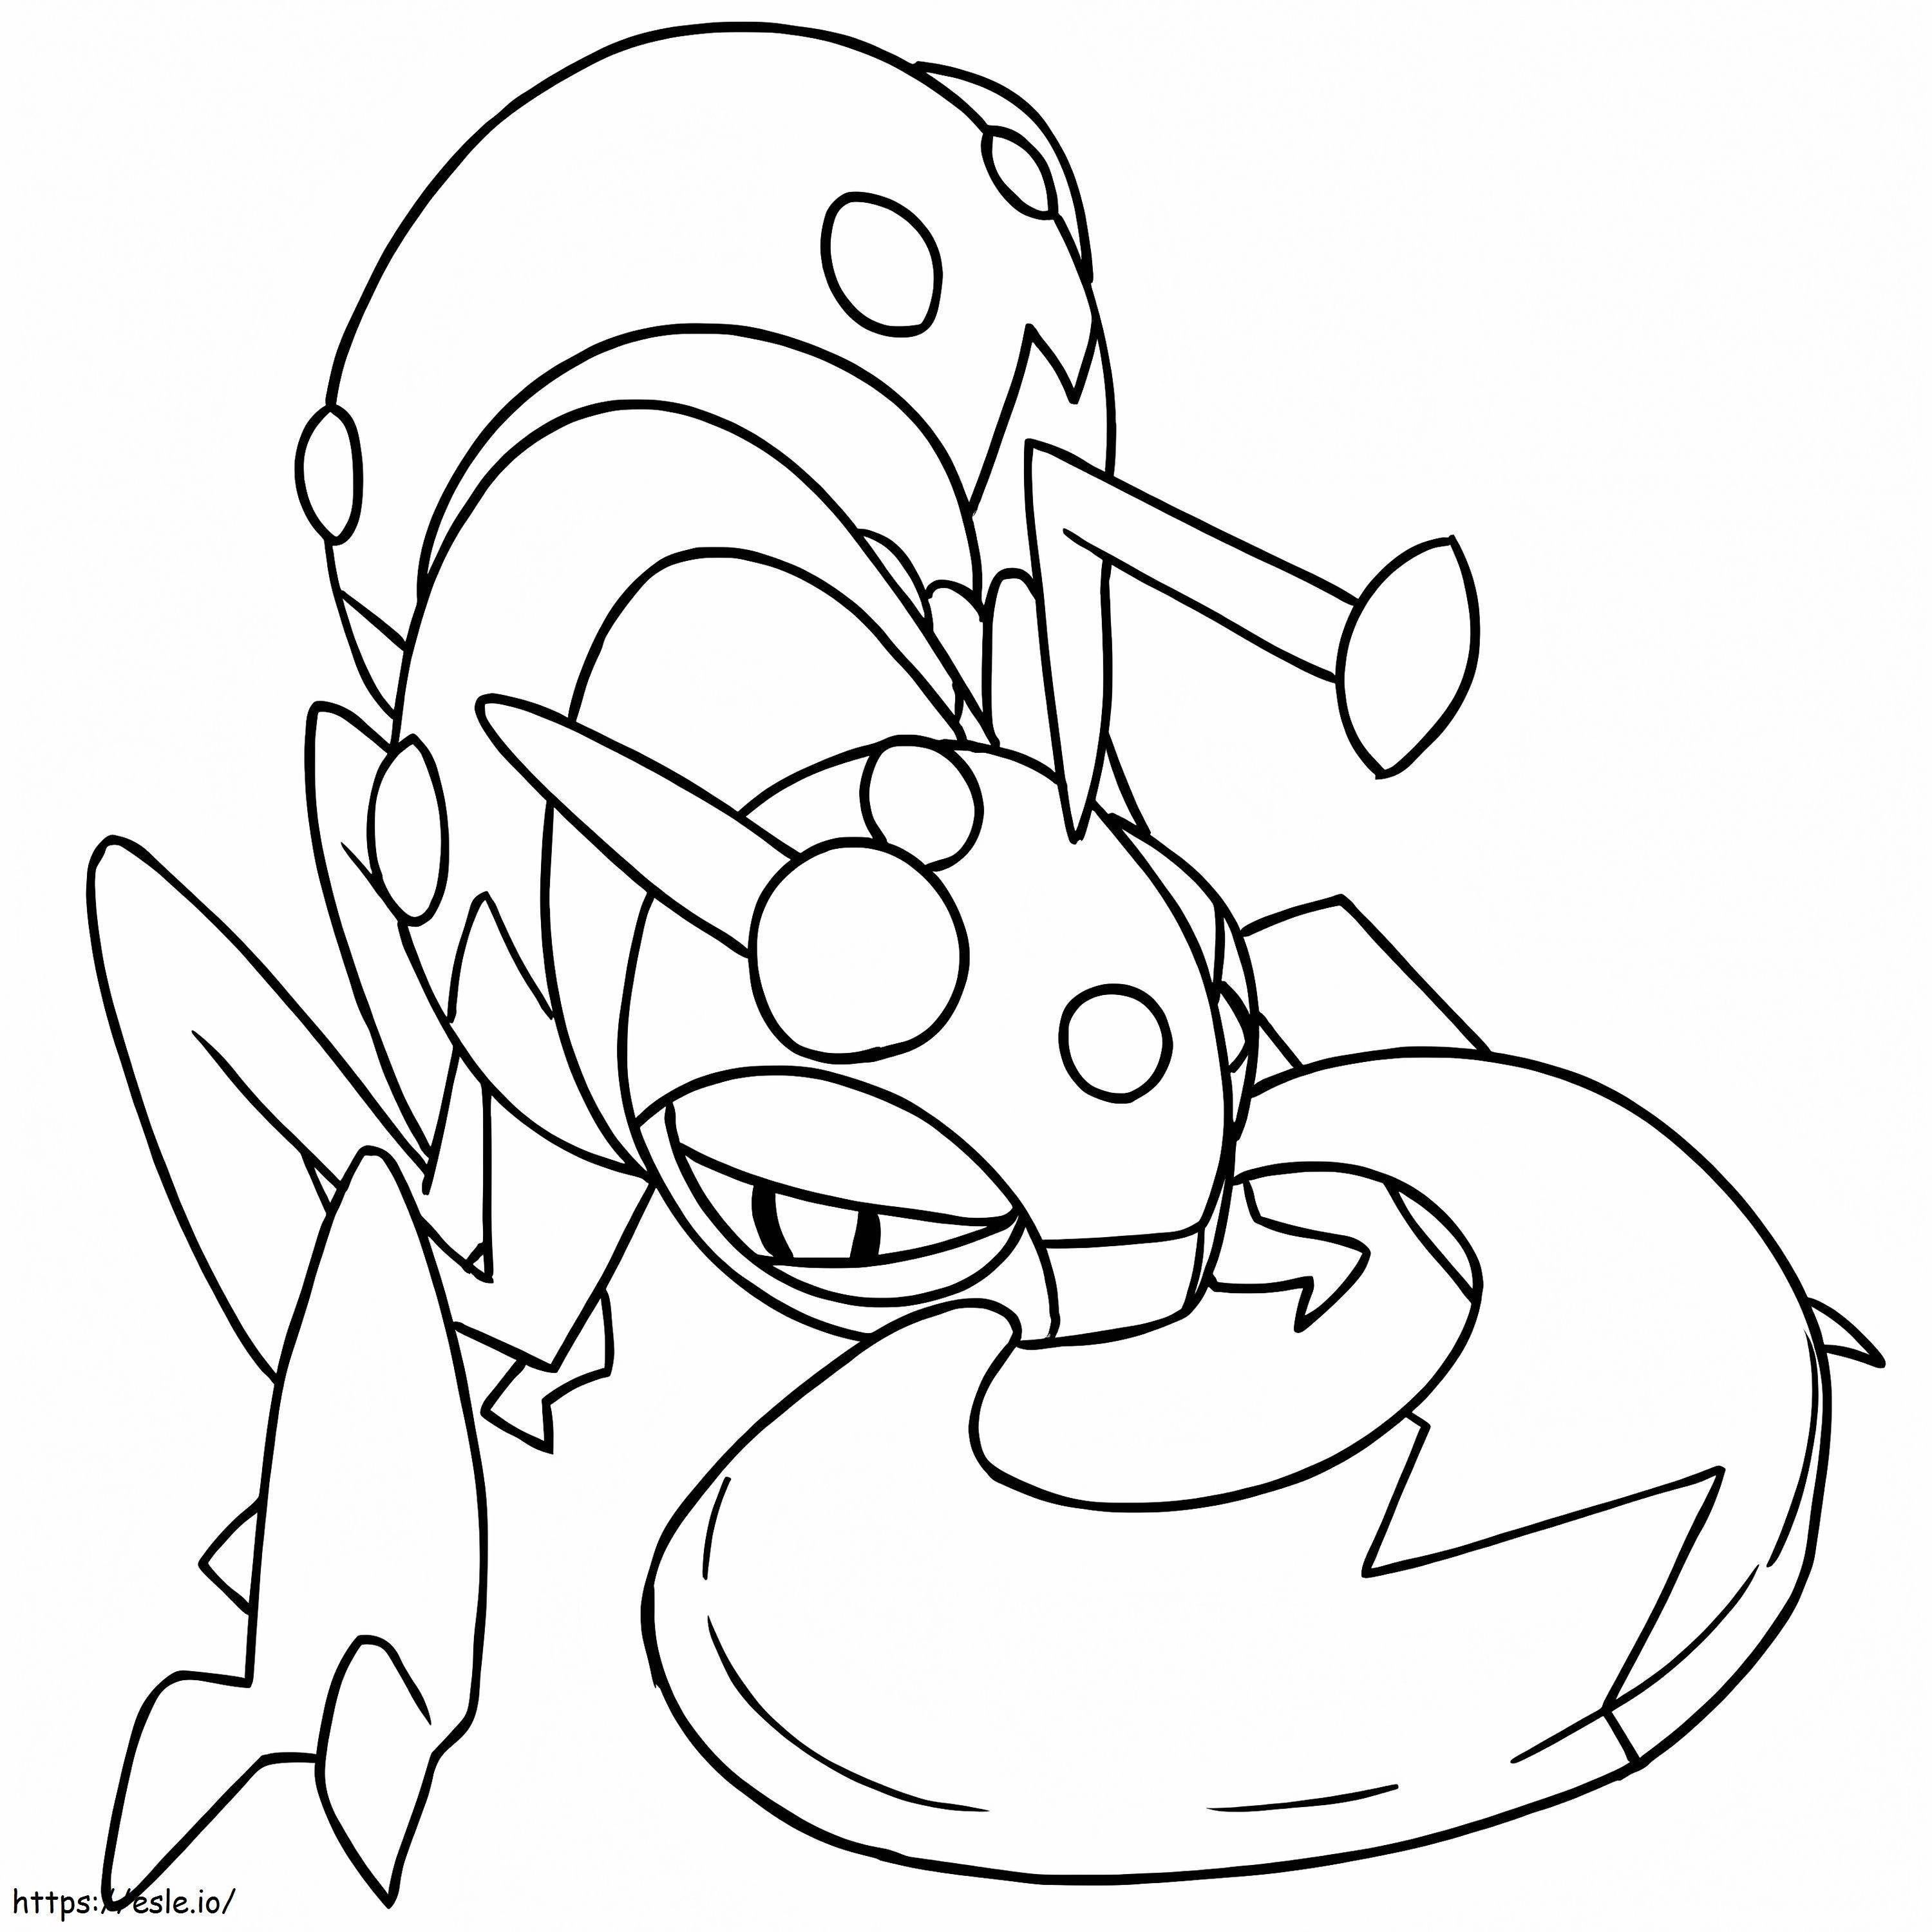 Durant Pokemon 1 coloring page